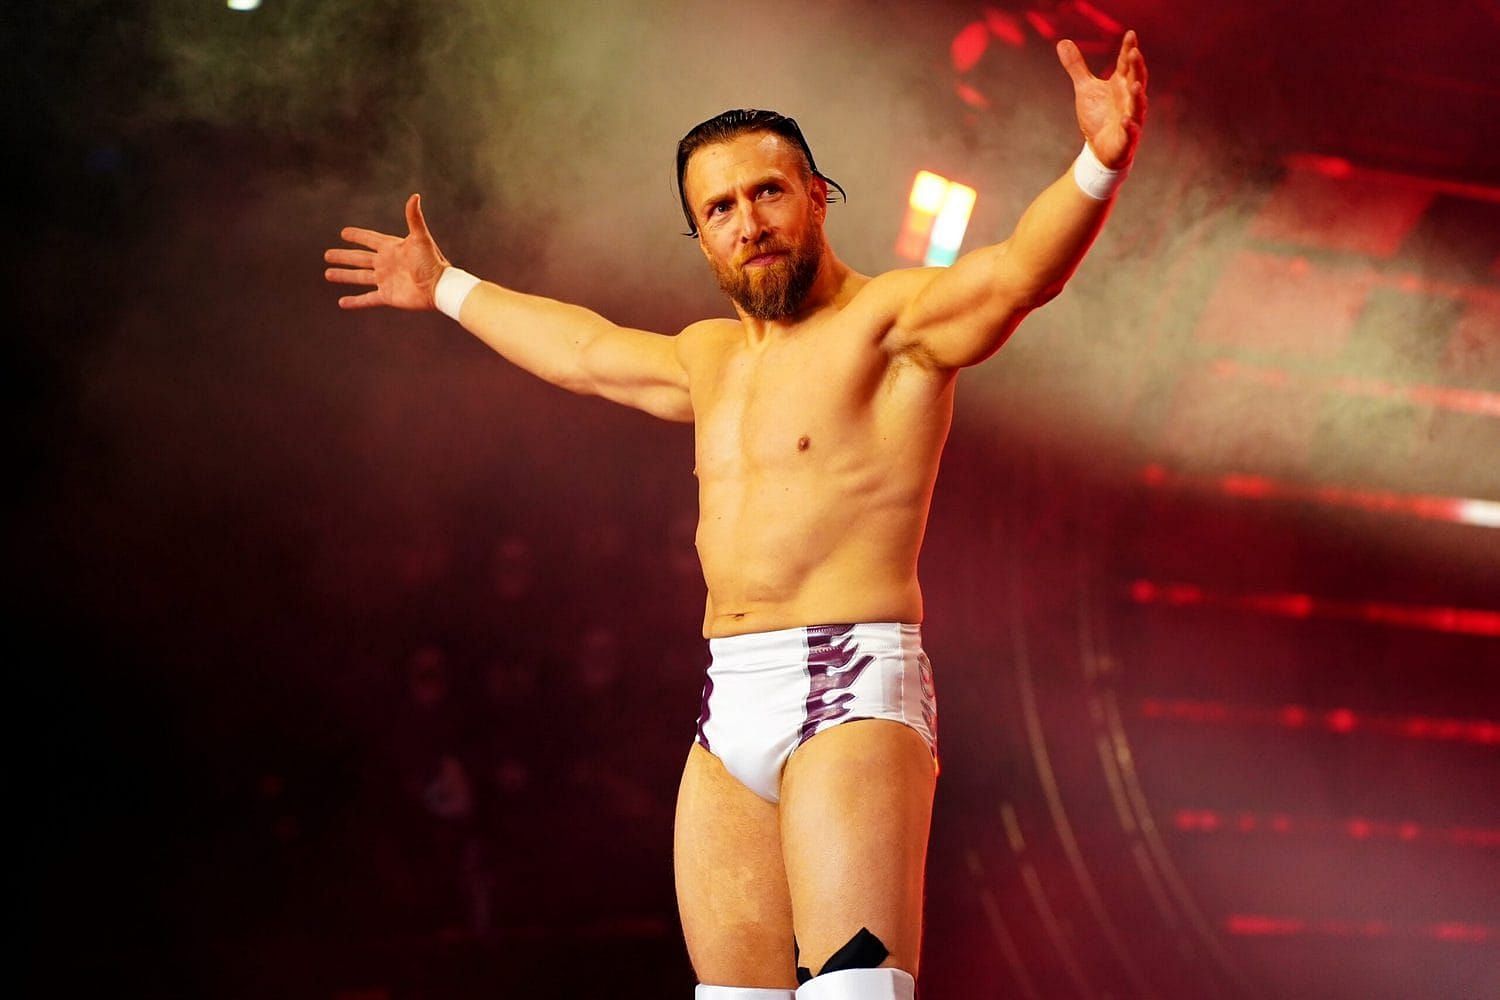 Bryan Danielson might start recruiting wrestlers to his faction.